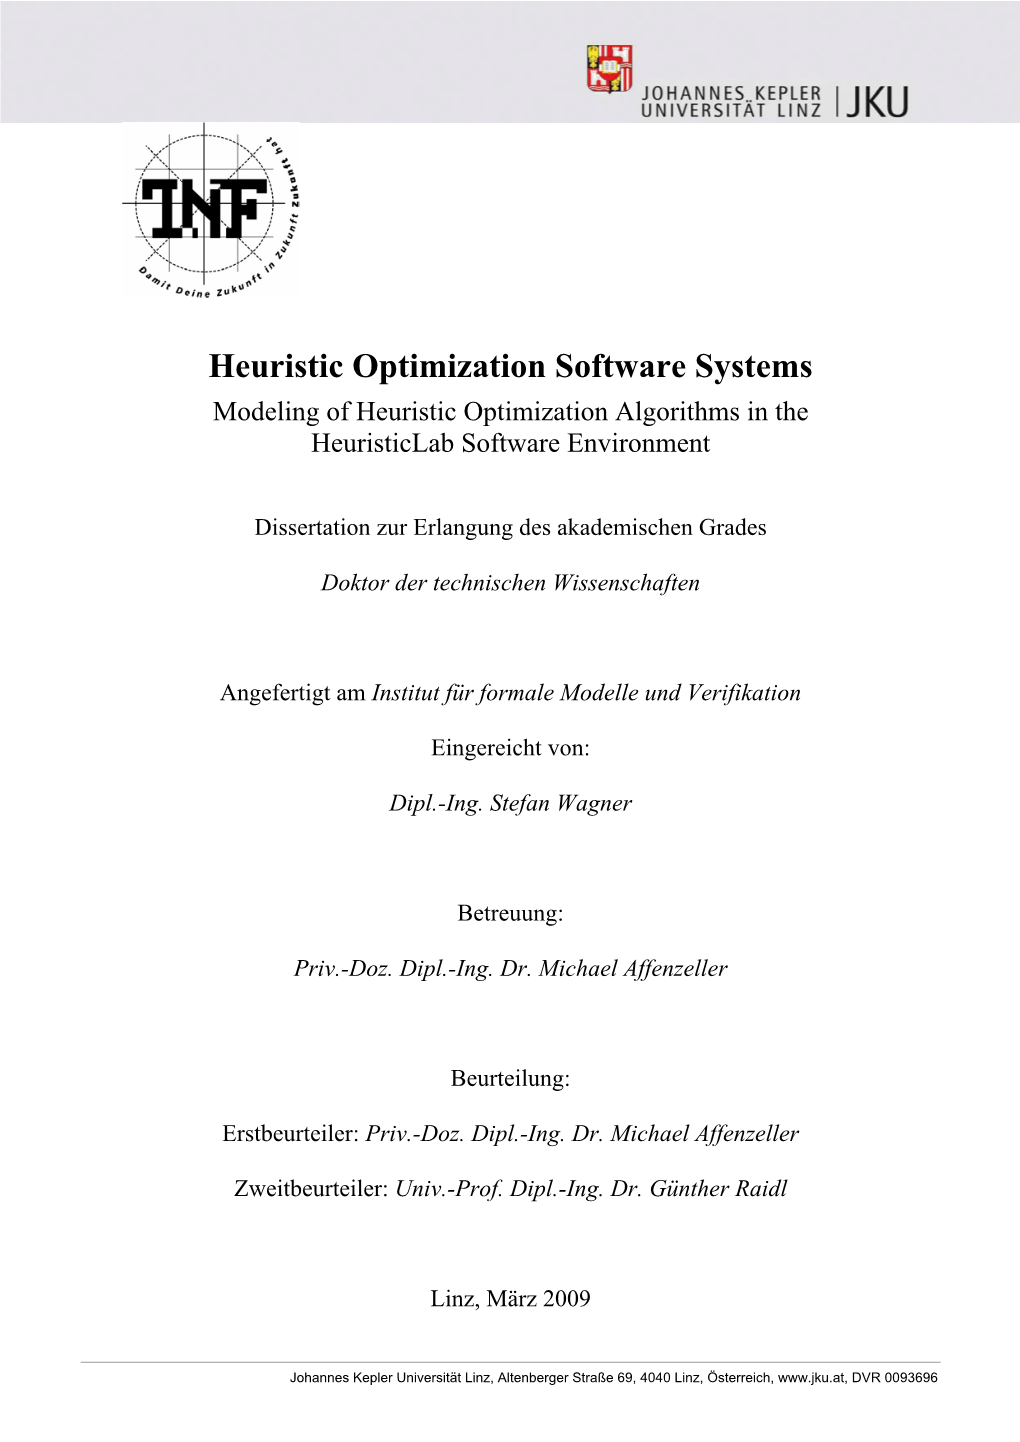 Heuristic Optimization Software Systems Modeling of Heuristic Optimization Algorithms in the Heuristiclab Software Environment